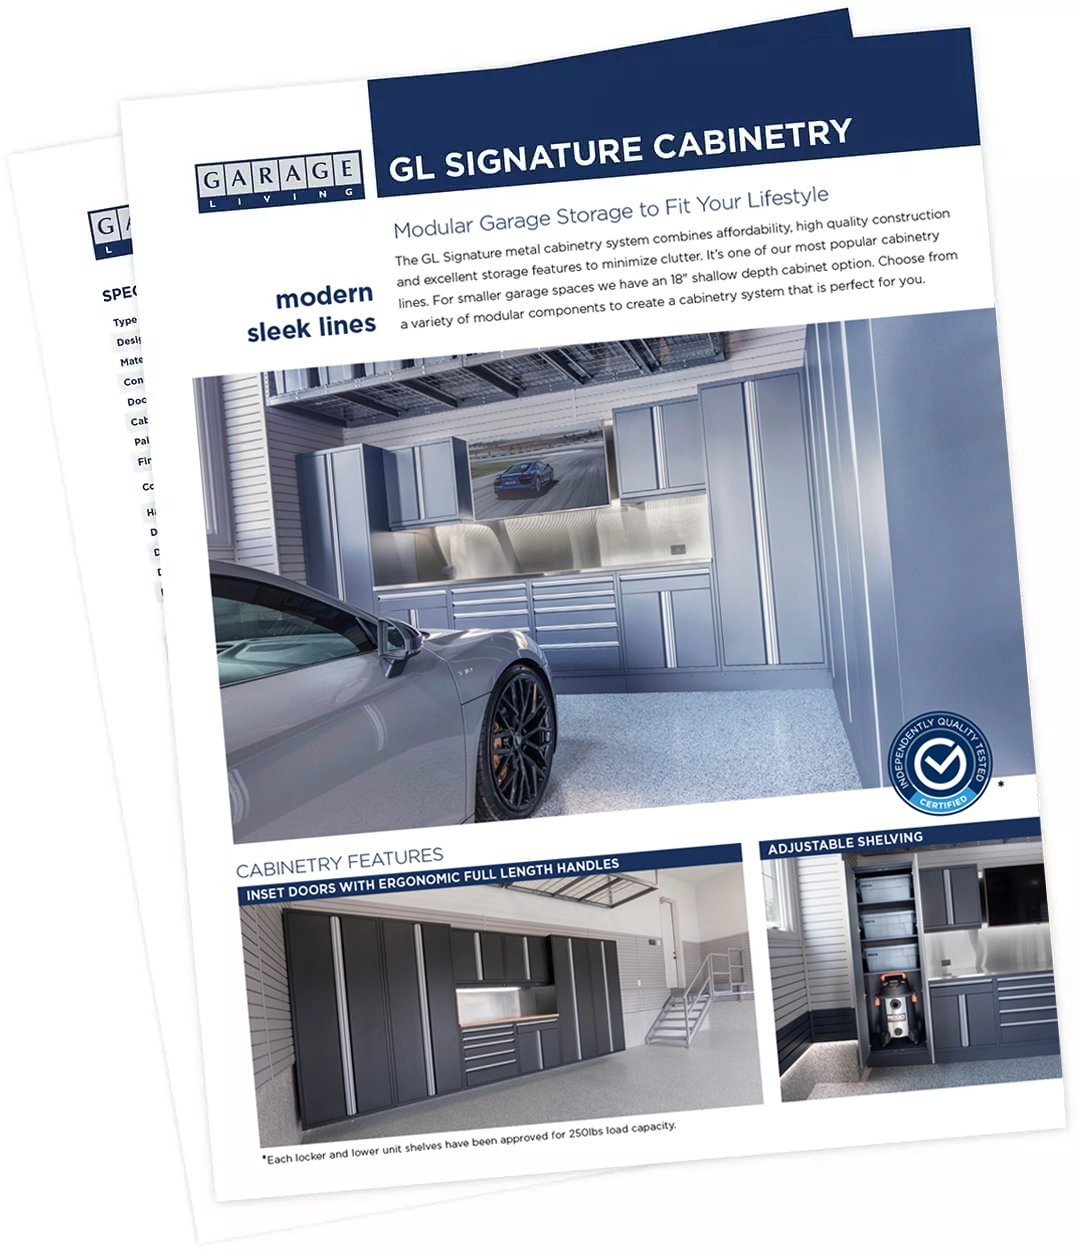 xgl-signature-cabinetry-042921.jpg.pagespeed.ic.xbne3RAPVH-2